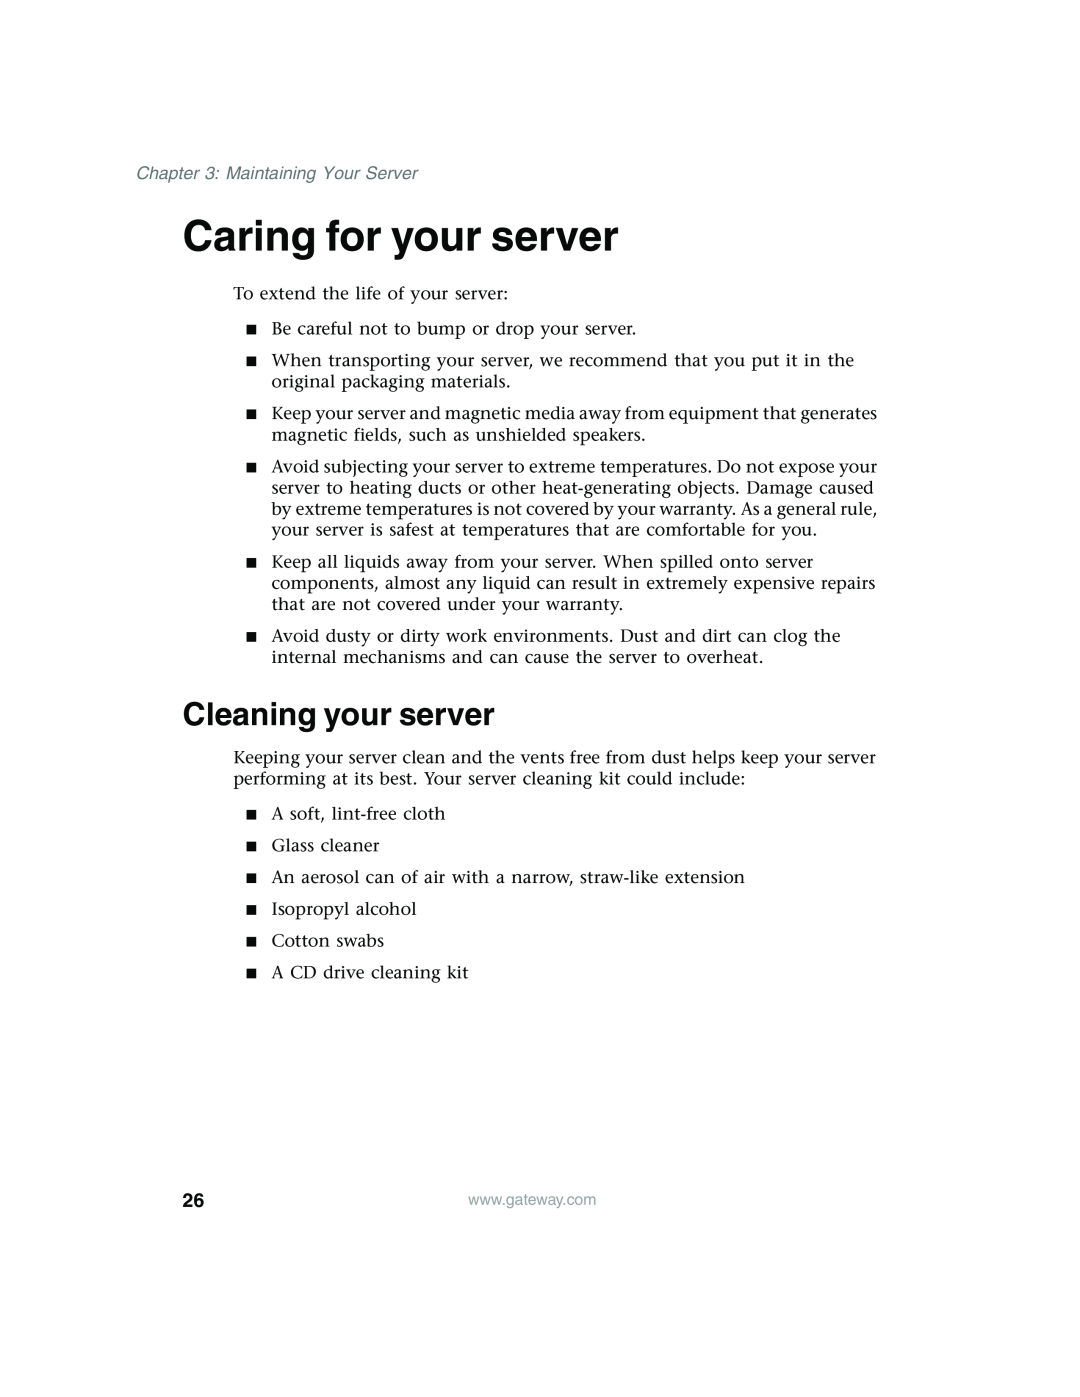 Gateway 955 manual Caring for your server, Cleaning your server, Maintaining Your Server 